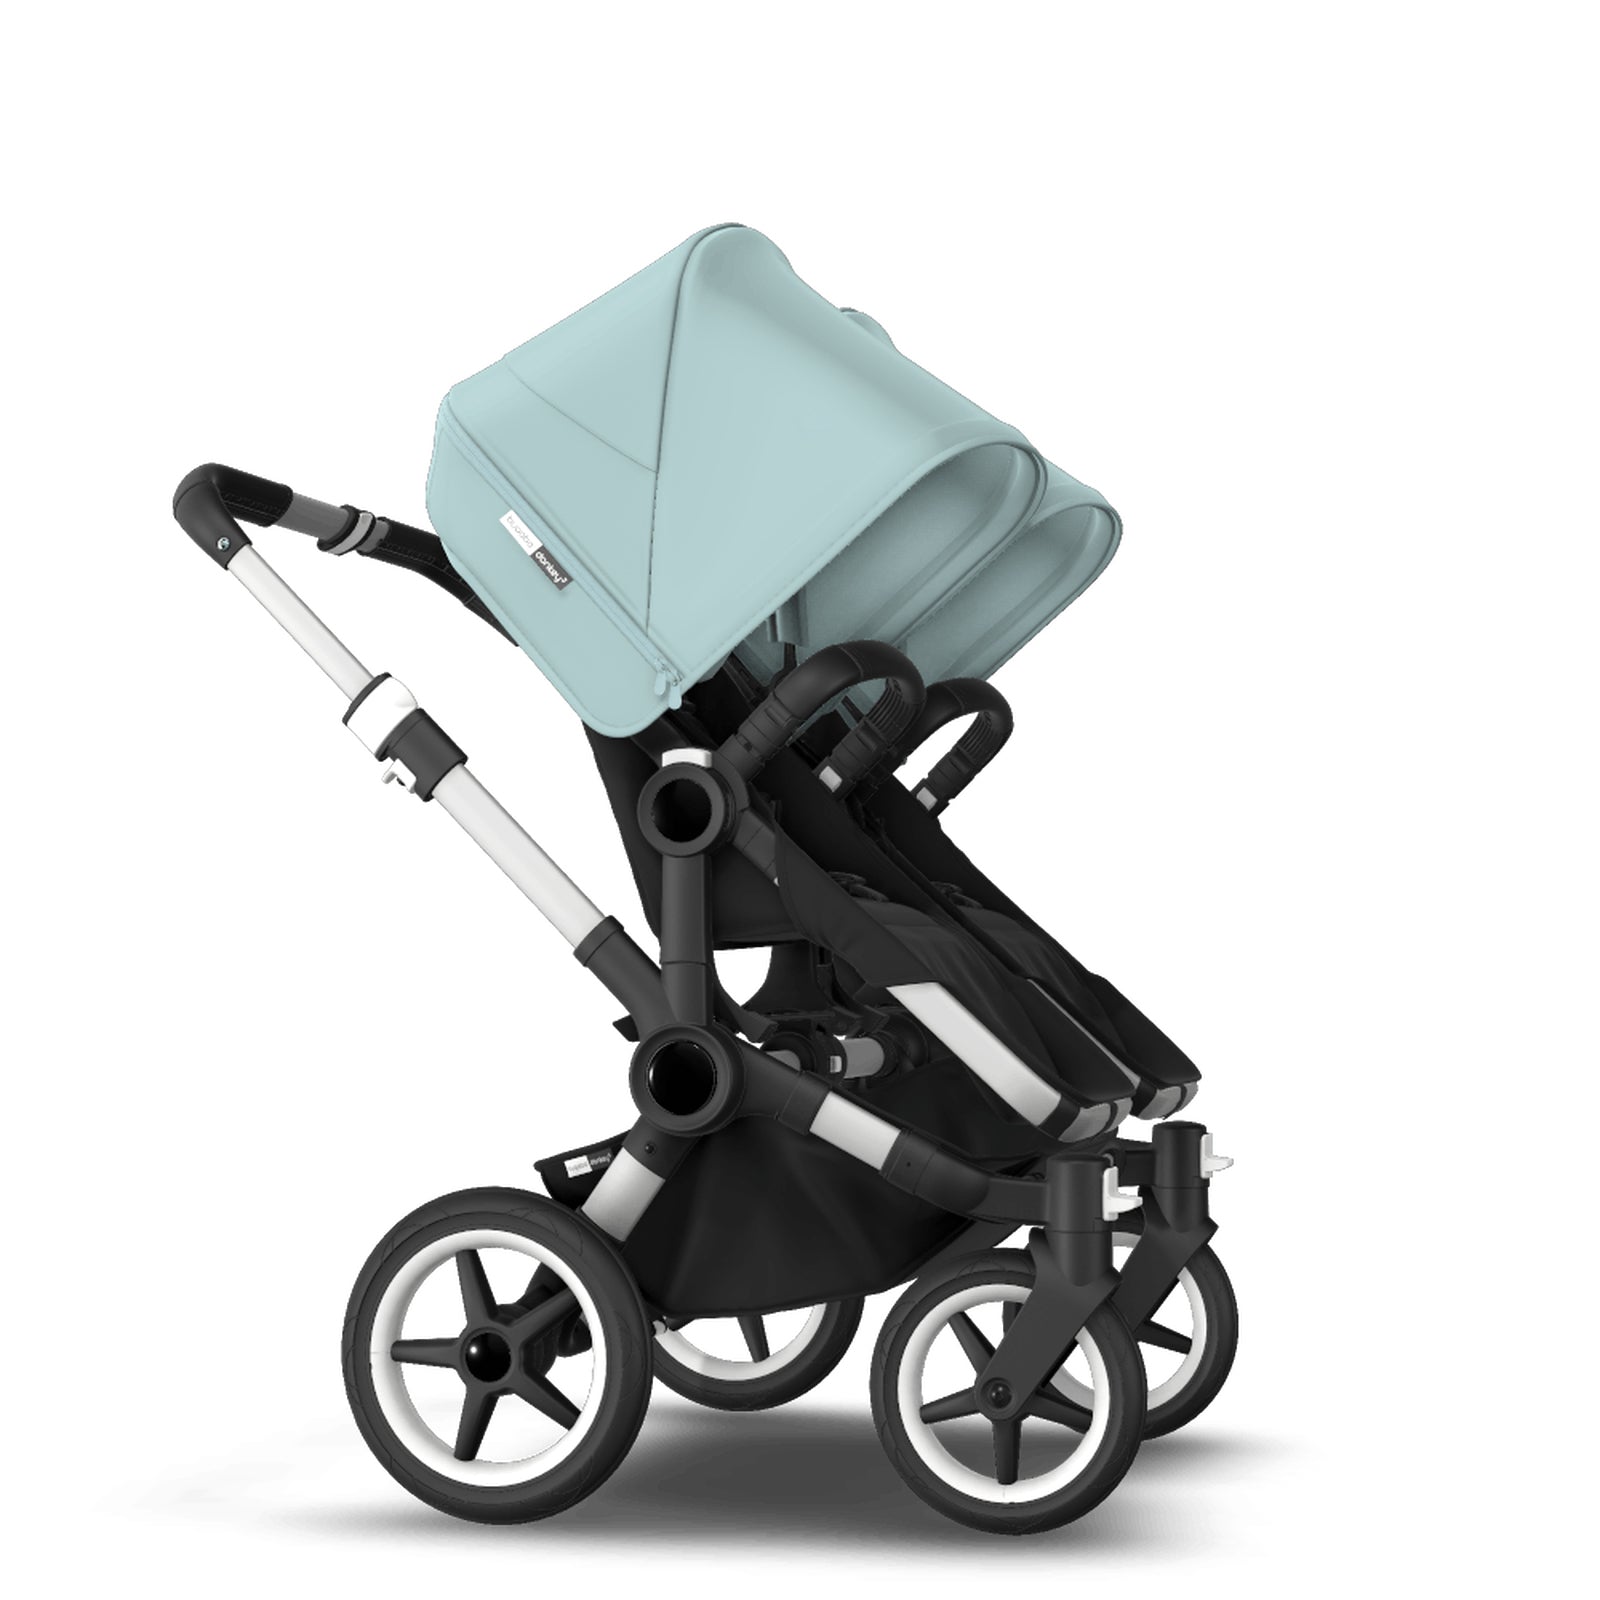 Bugaboo Donkey 3 Twin Seat and Carrycot Pushchair - Vapor Blue